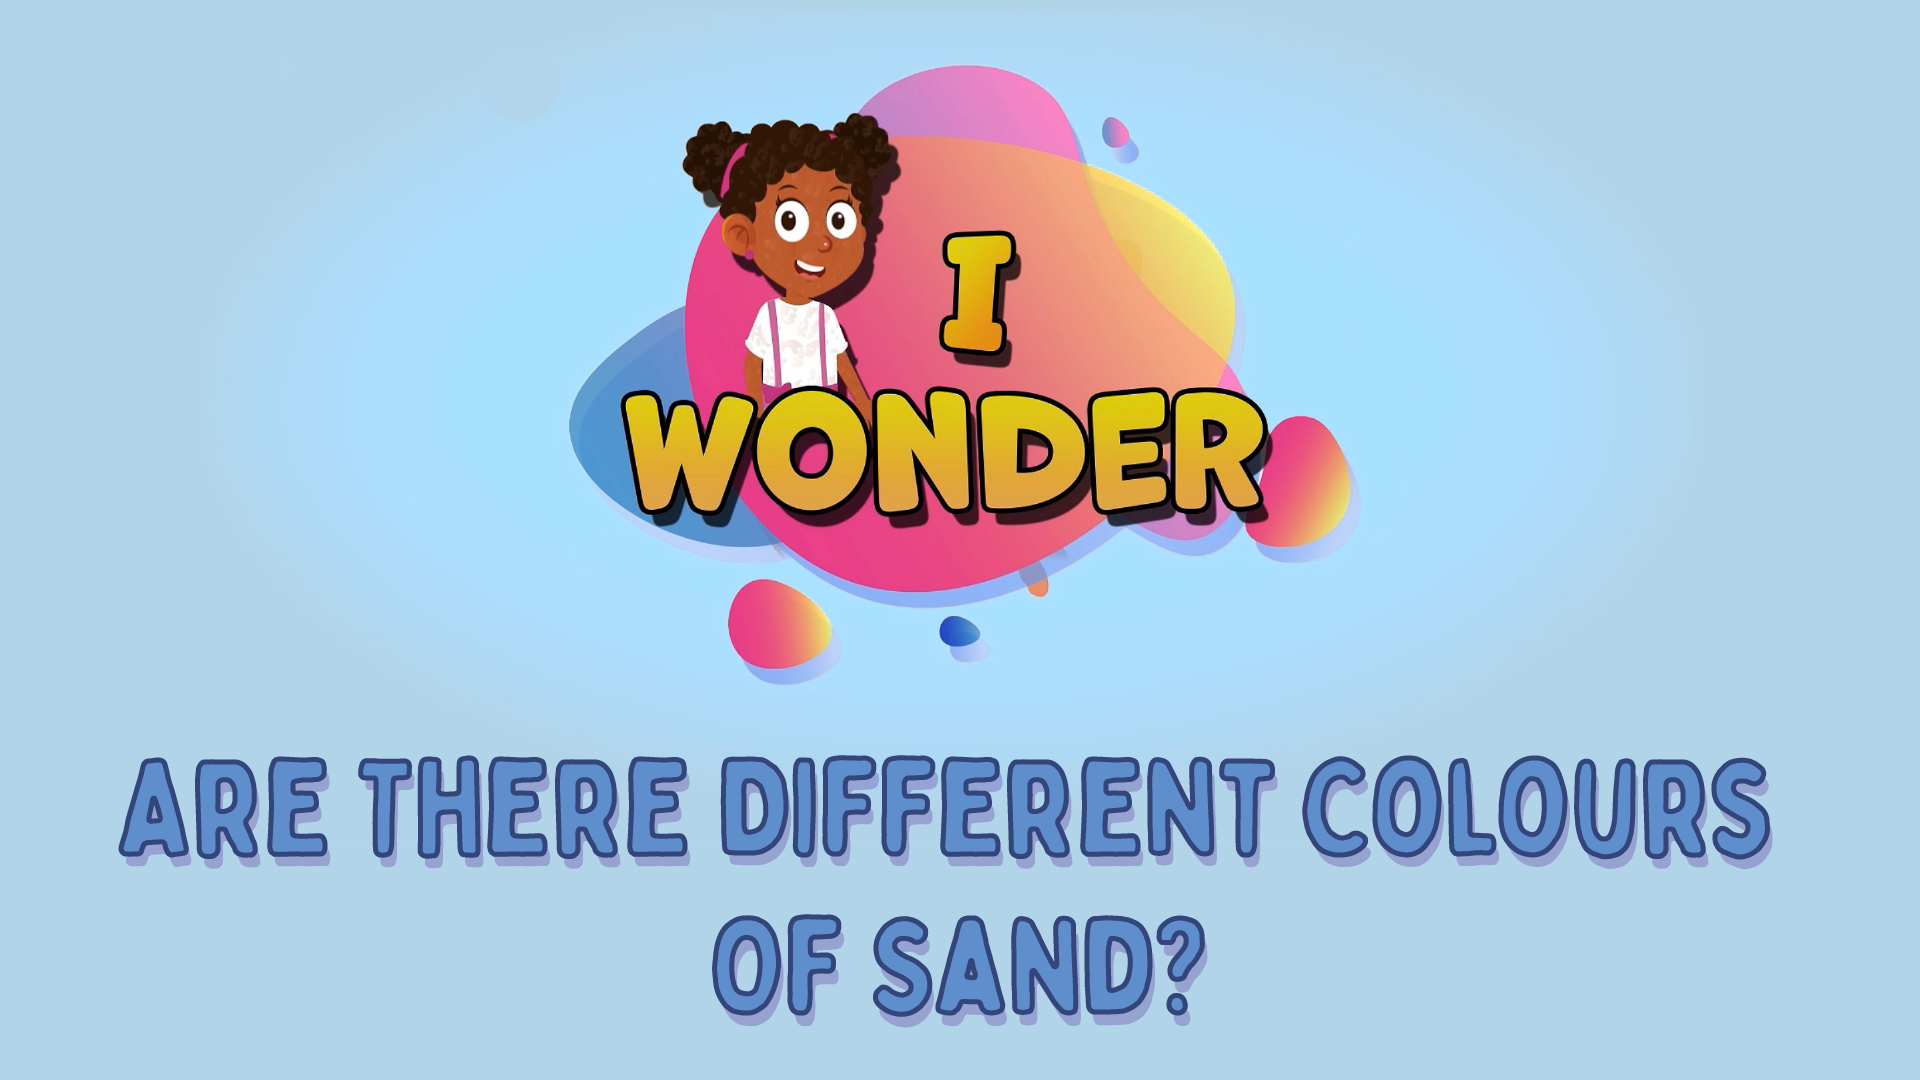 Are There Different Colours Of Sand?